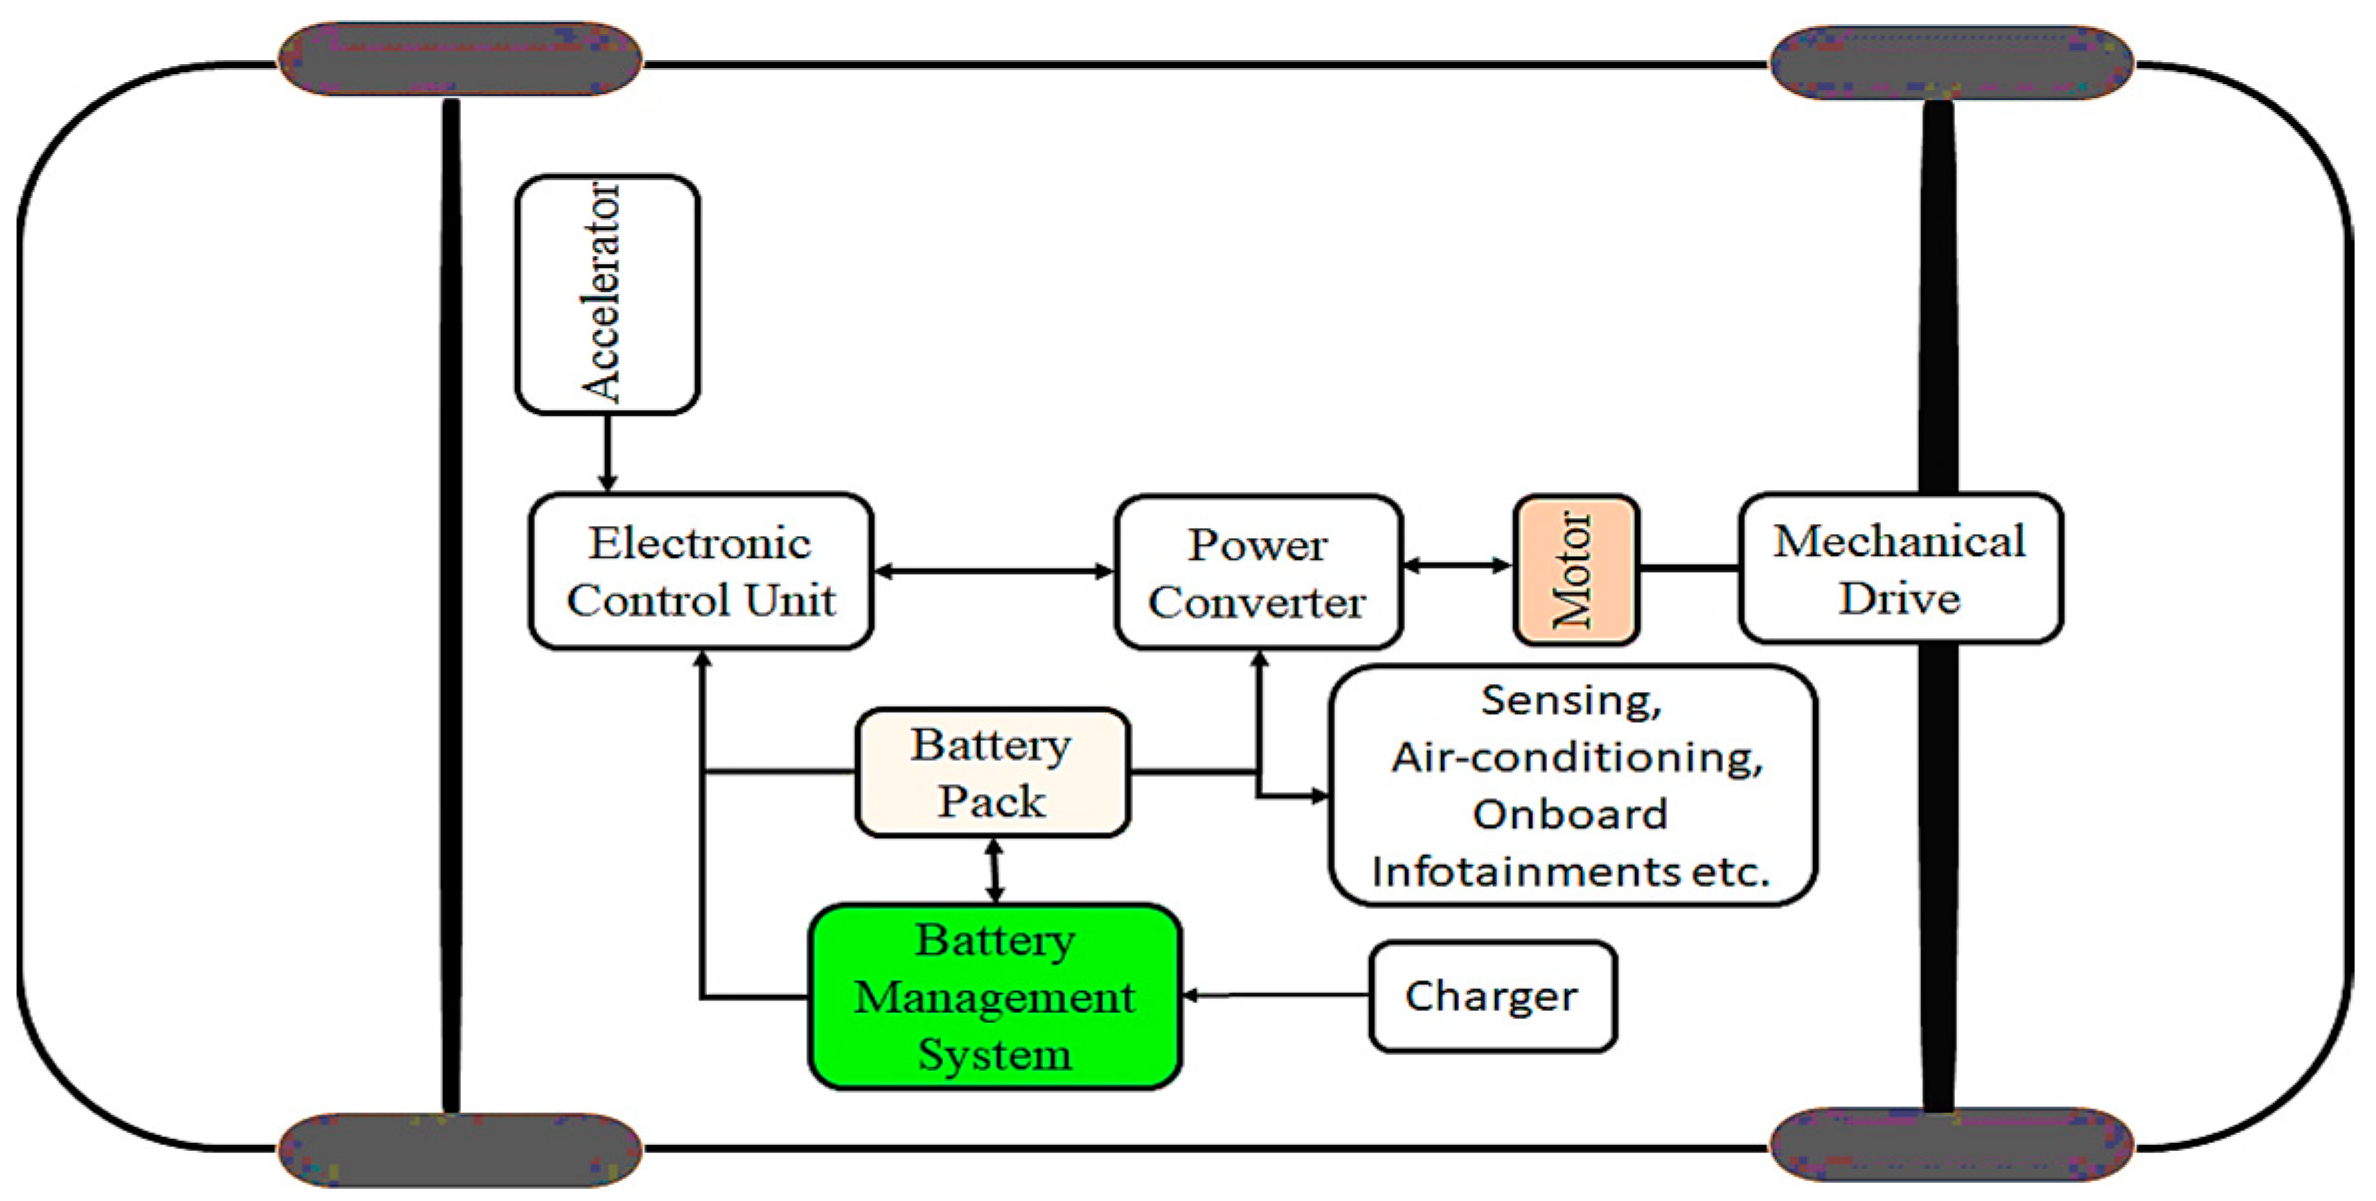 Designing applications with Li-ion batteries - Battery Management